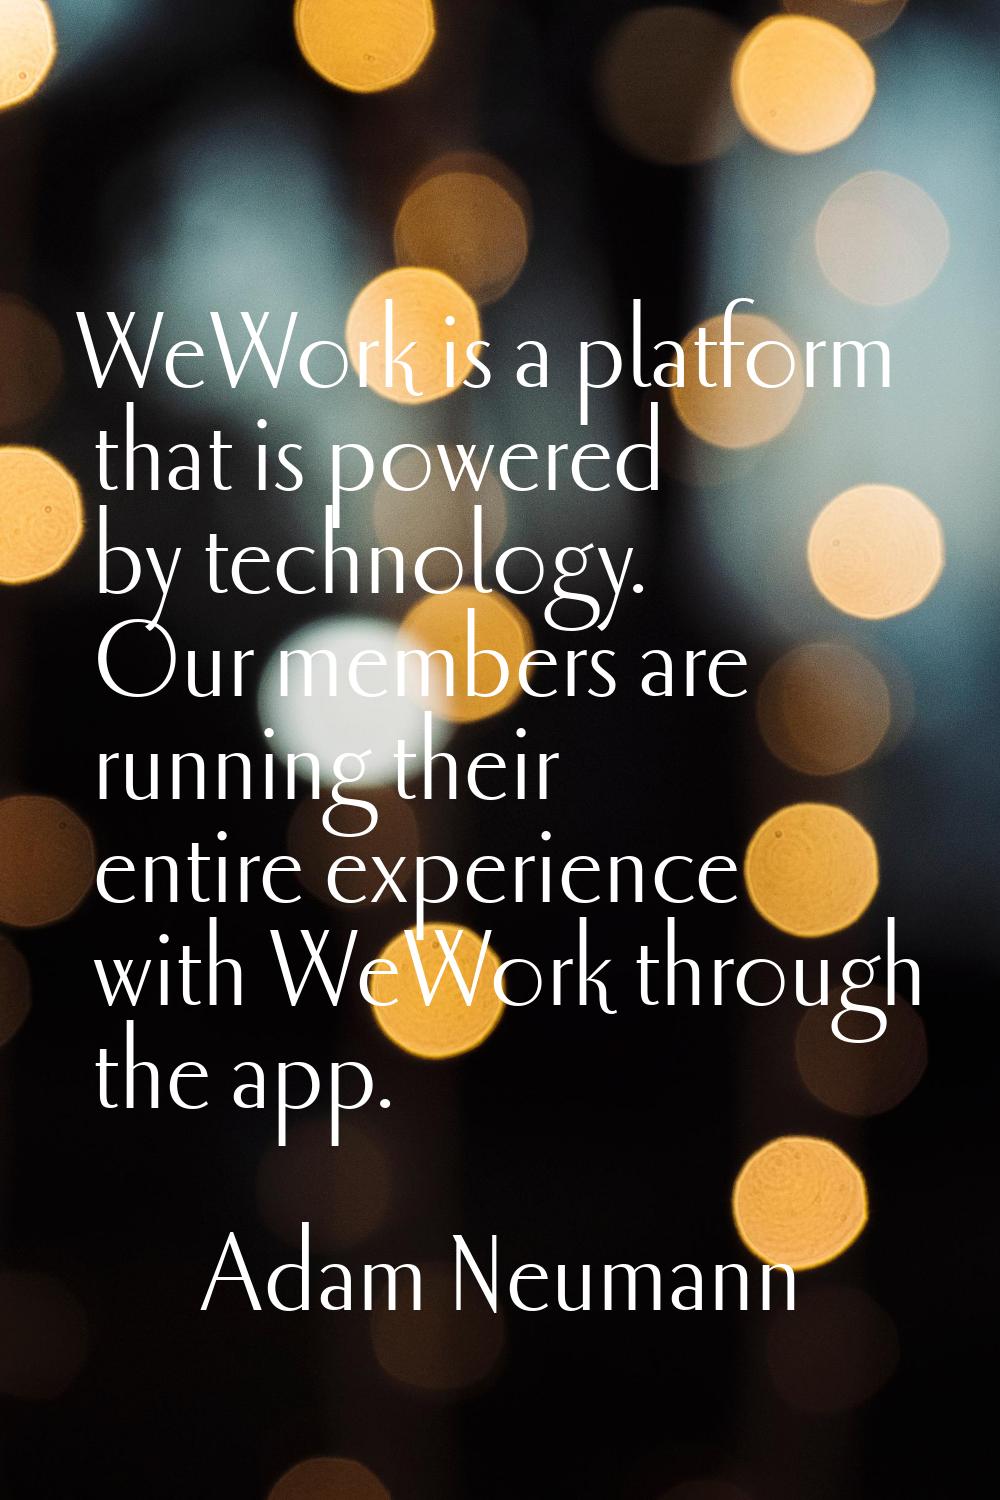 WeWork is a platform that is powered by technology. Our members are running their entire experience